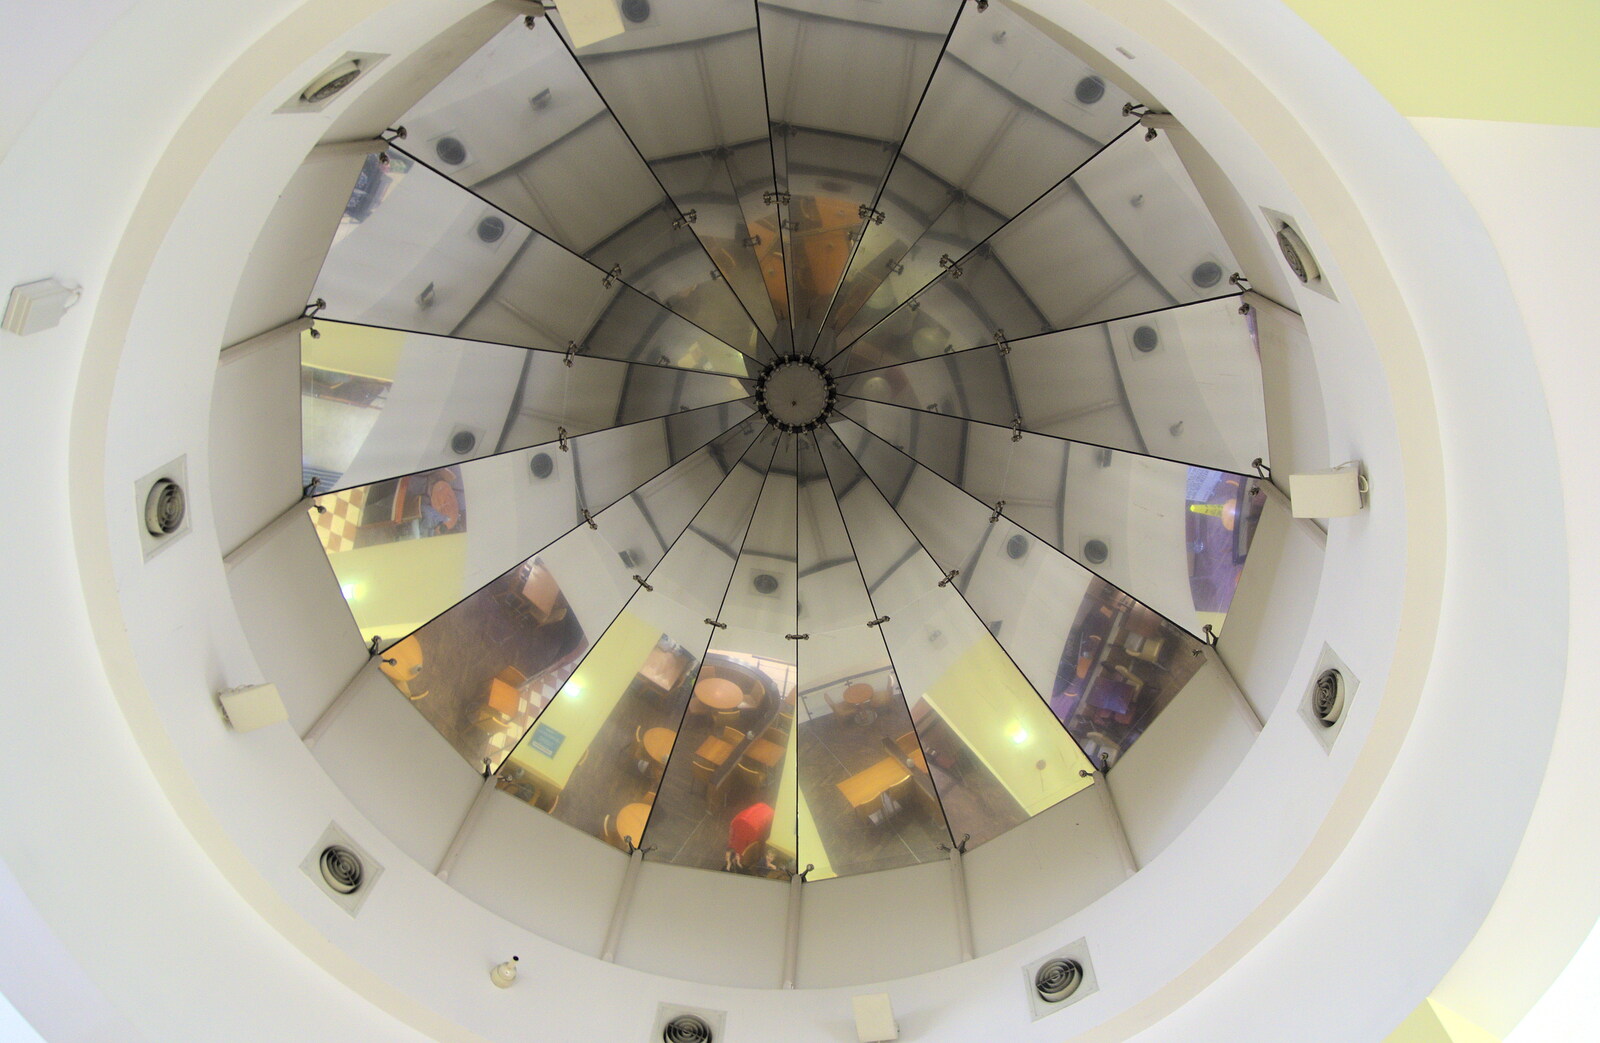 Fred's 'rocket' - a mirrored conical ceiling from A Trip to Spreyton, Devon - 24th December 2012